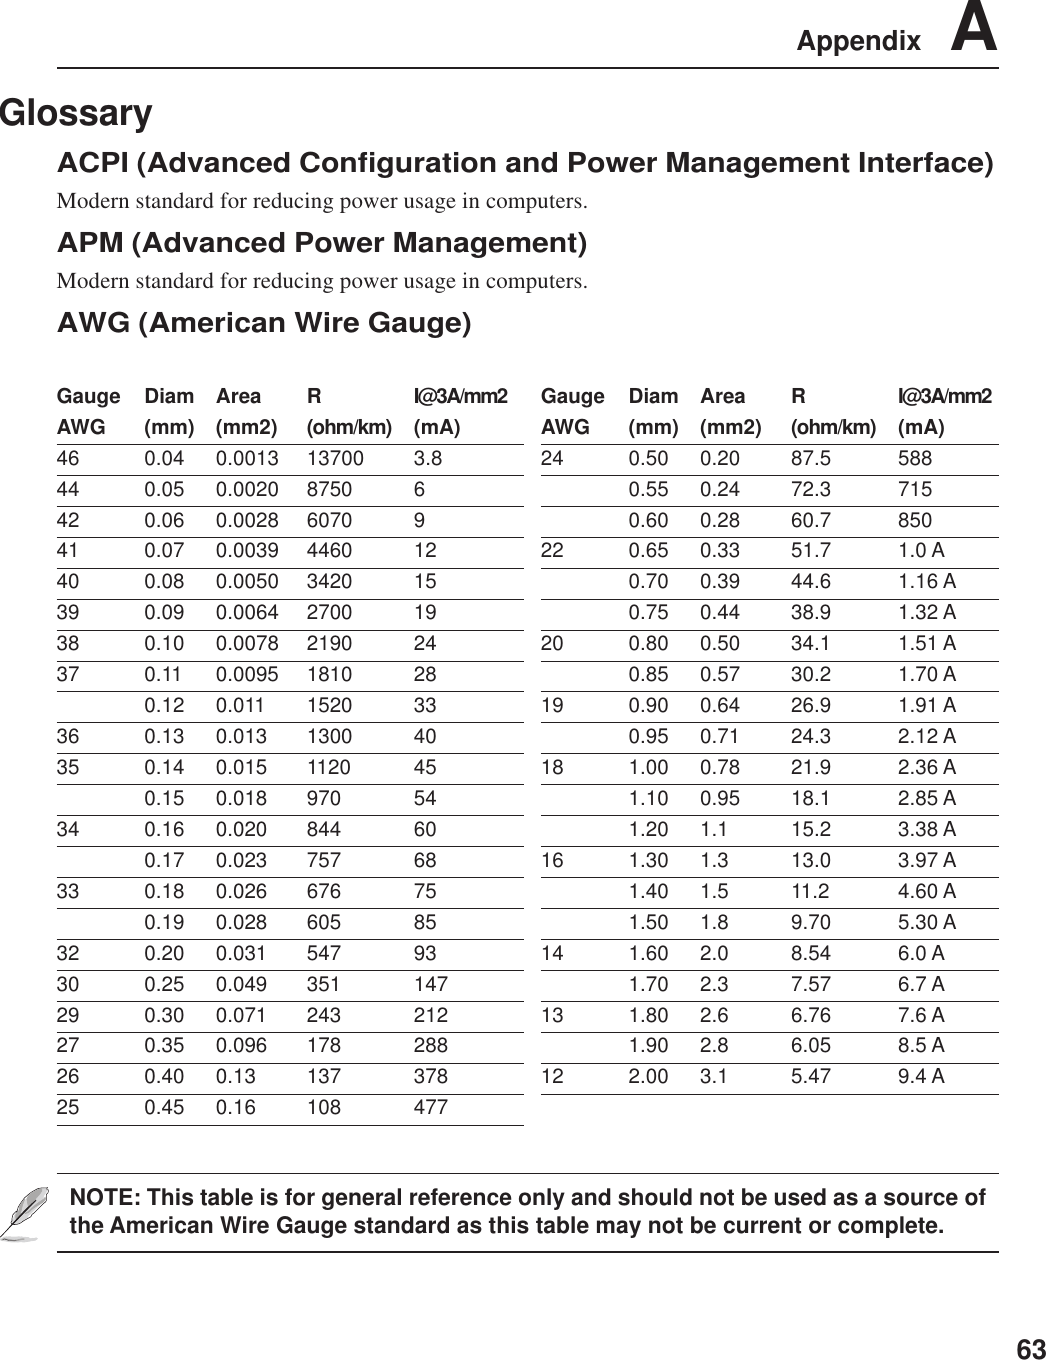 63Appendix    AGlossaryACPI (Advanced Configuration and Power Management Interface)Modern standard for reducing power usage in computers.APM (Advanced Power Management)Modern standard for reducing power usage in computers.AWG (American Wire Gauge)NOTE: This table is for general reference only and should not be used as a source ofthe American Wire Gauge standard as this table may not be current or complete.Gauge Diam Area R I@3A/mm2AWG (mm) (mm2) (ohm/km) (mA)46 0.04 0.0013 13700 3.844 0.05 0.0020 8750 642 0.06 0.0028 6070 941 0.07 0.0039 4460 1240 0.08 0.0050 3420 1539 0.09 0.0064 2700 1938 0.10 0.0078 2190 2437 0.11 0.0095 1810 280.12 0.011 1520 3336 0.13 0.013 1300 4035 0.14 0.015 1120 450.15 0.018 970 5434 0.16 0.020 844 600.17 0.023 757 6833 0.18 0.026 676 750.19 0.028 605 8532 0.20 0.031 547 9330 0.25 0.049 351 14729 0.30 0.071 243 21227 0.35 0.096 178 28826 0.40 0.13 137 37825 0.45 0.16 108 477Gauge Diam Area R I@3A/mm2AWG (mm) (mm2) (ohm/km) (mA)24 0.50 0.20 87.5 5880.55 0.24 72.3 7150.60 0.28 60.7 85022 0.65 0.33 51.7 1.0 A0.70 0.39 44.6 1.16 A0.75 0.44 38.9 1.32 A20 0.80 0.50 34.1 1.51 A0.85 0.57 30.2 1.70 A19 0.90 0.64 26.9 1.91 A0.95 0.71 24.3 2.12 A18 1.00 0.78 21.9 2.36 A1.10 0.95 18.1 2.85 A1.20 1.1 15.2 3.38 A16 1.30 1.3 13.0 3.97 A1.40 1.5 11.2 4.60 A1.50 1.8 9.70 5.30 A14 1.60 2.0 8.54 6.0 A1.70 2.3 7.57 6.7 A13 1.80 2.6 6.76 7.6 A1.90 2.8 6.05 8.5 A12 2.00 3.1 5.47 9.4 A